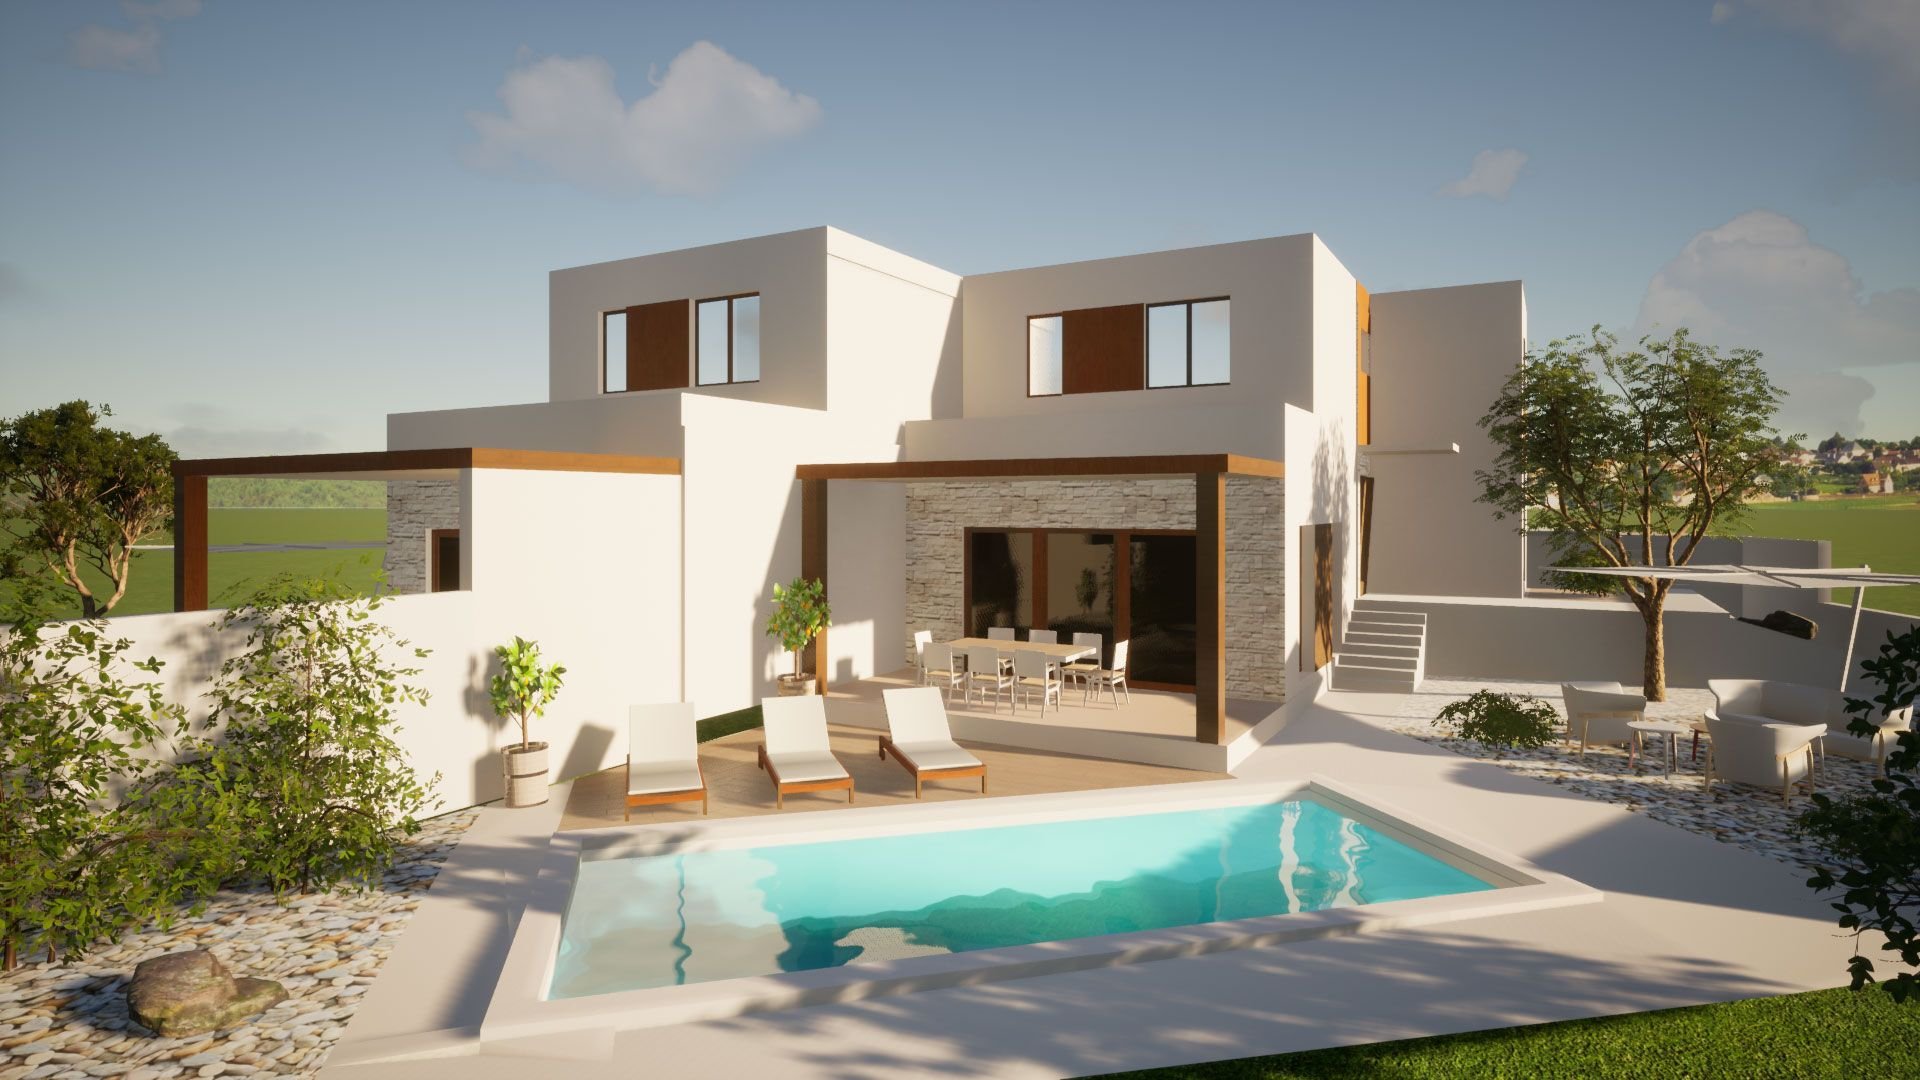 Z-01 2 semi-detached houses with pool for sale 151 m2 Kanfanar.